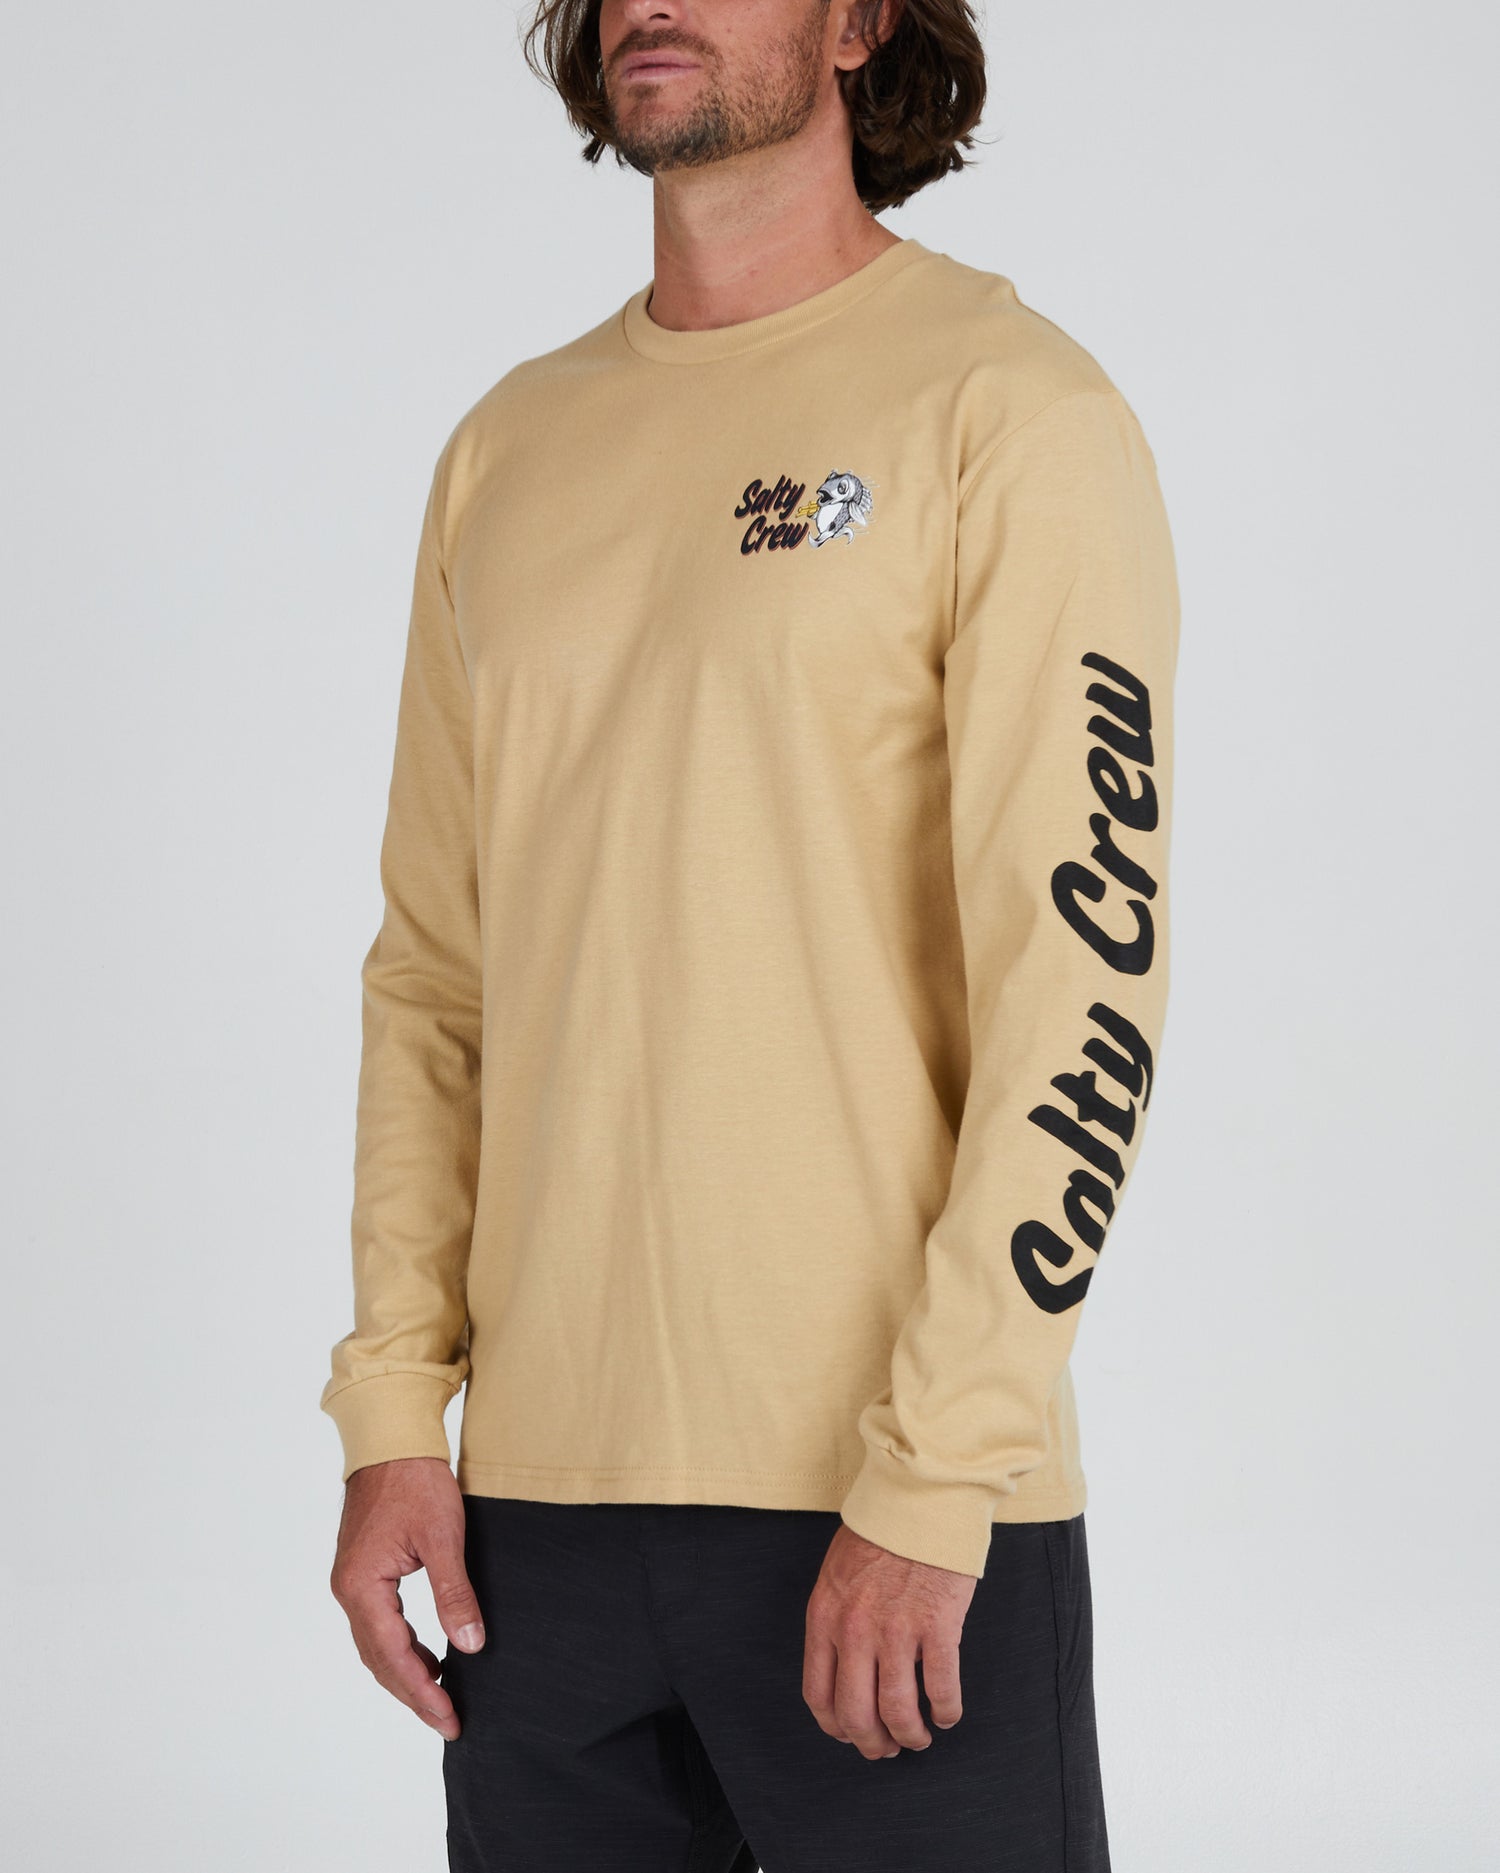 On body front angle of the Fish And Chips Camel L/S Premium Tee